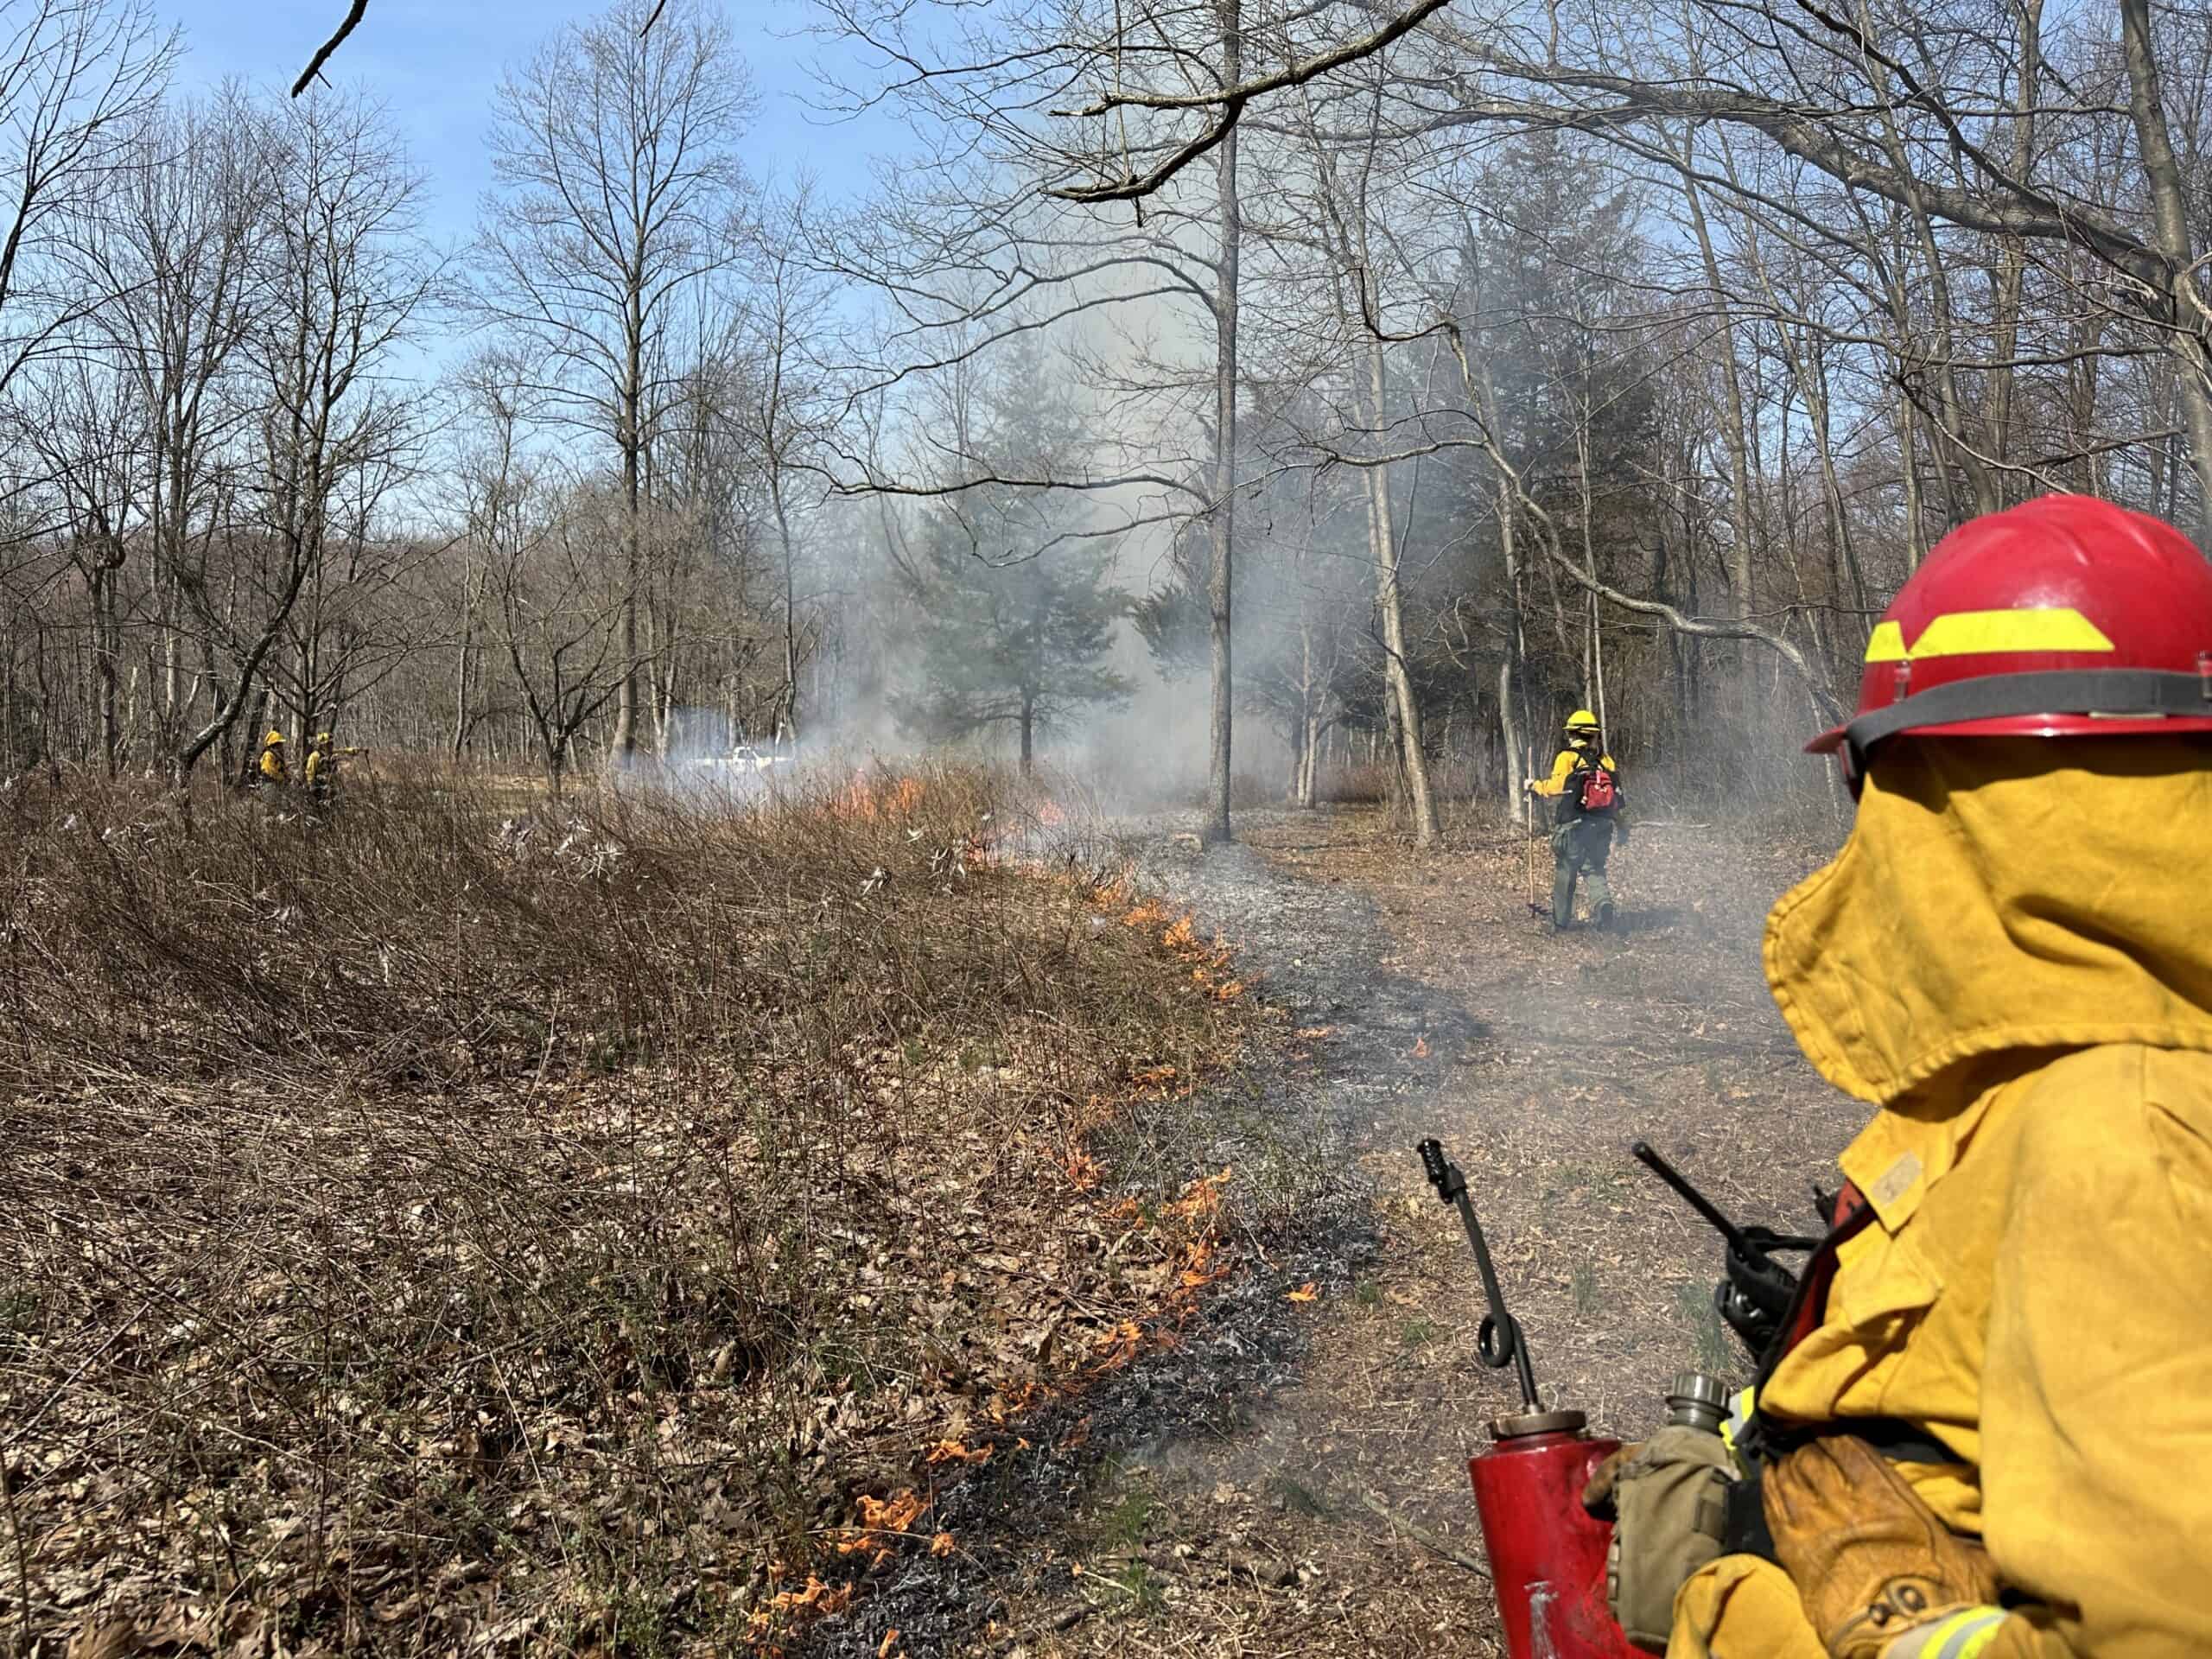 A woodland opening being managed with prescribed fire.